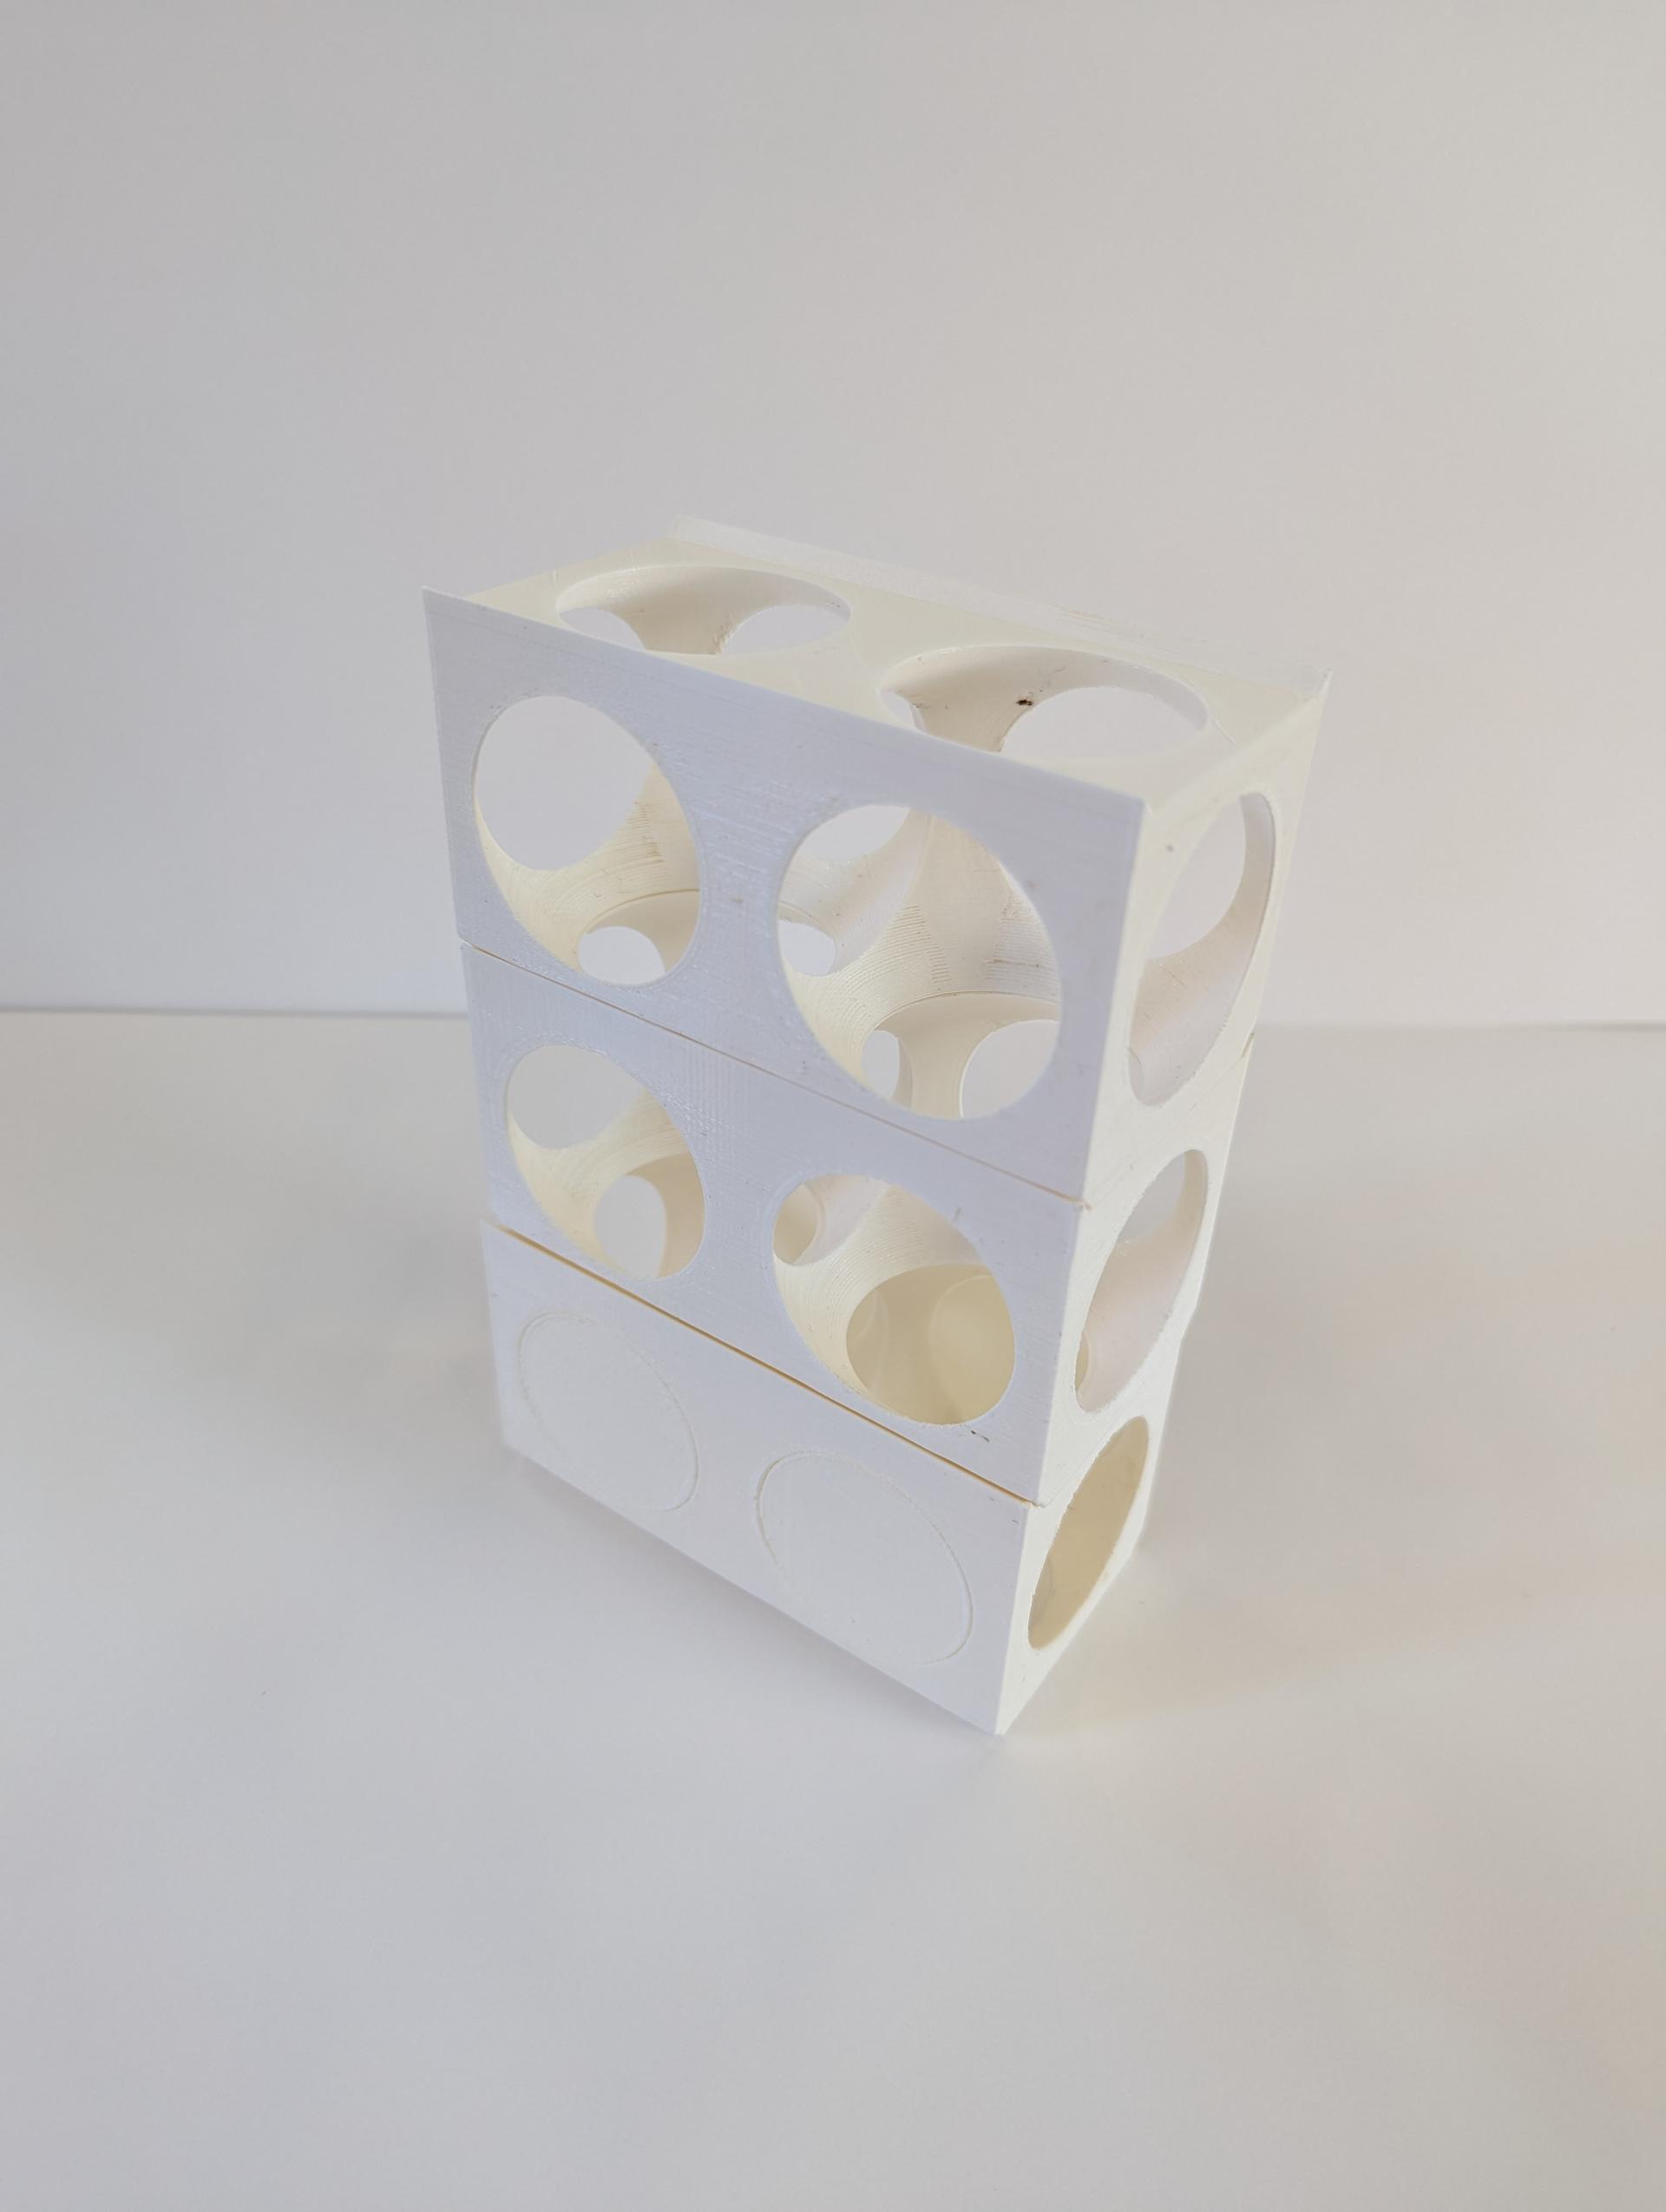 3D printed rectilinear block is voided via 2 spheres to create a skeletal frame.